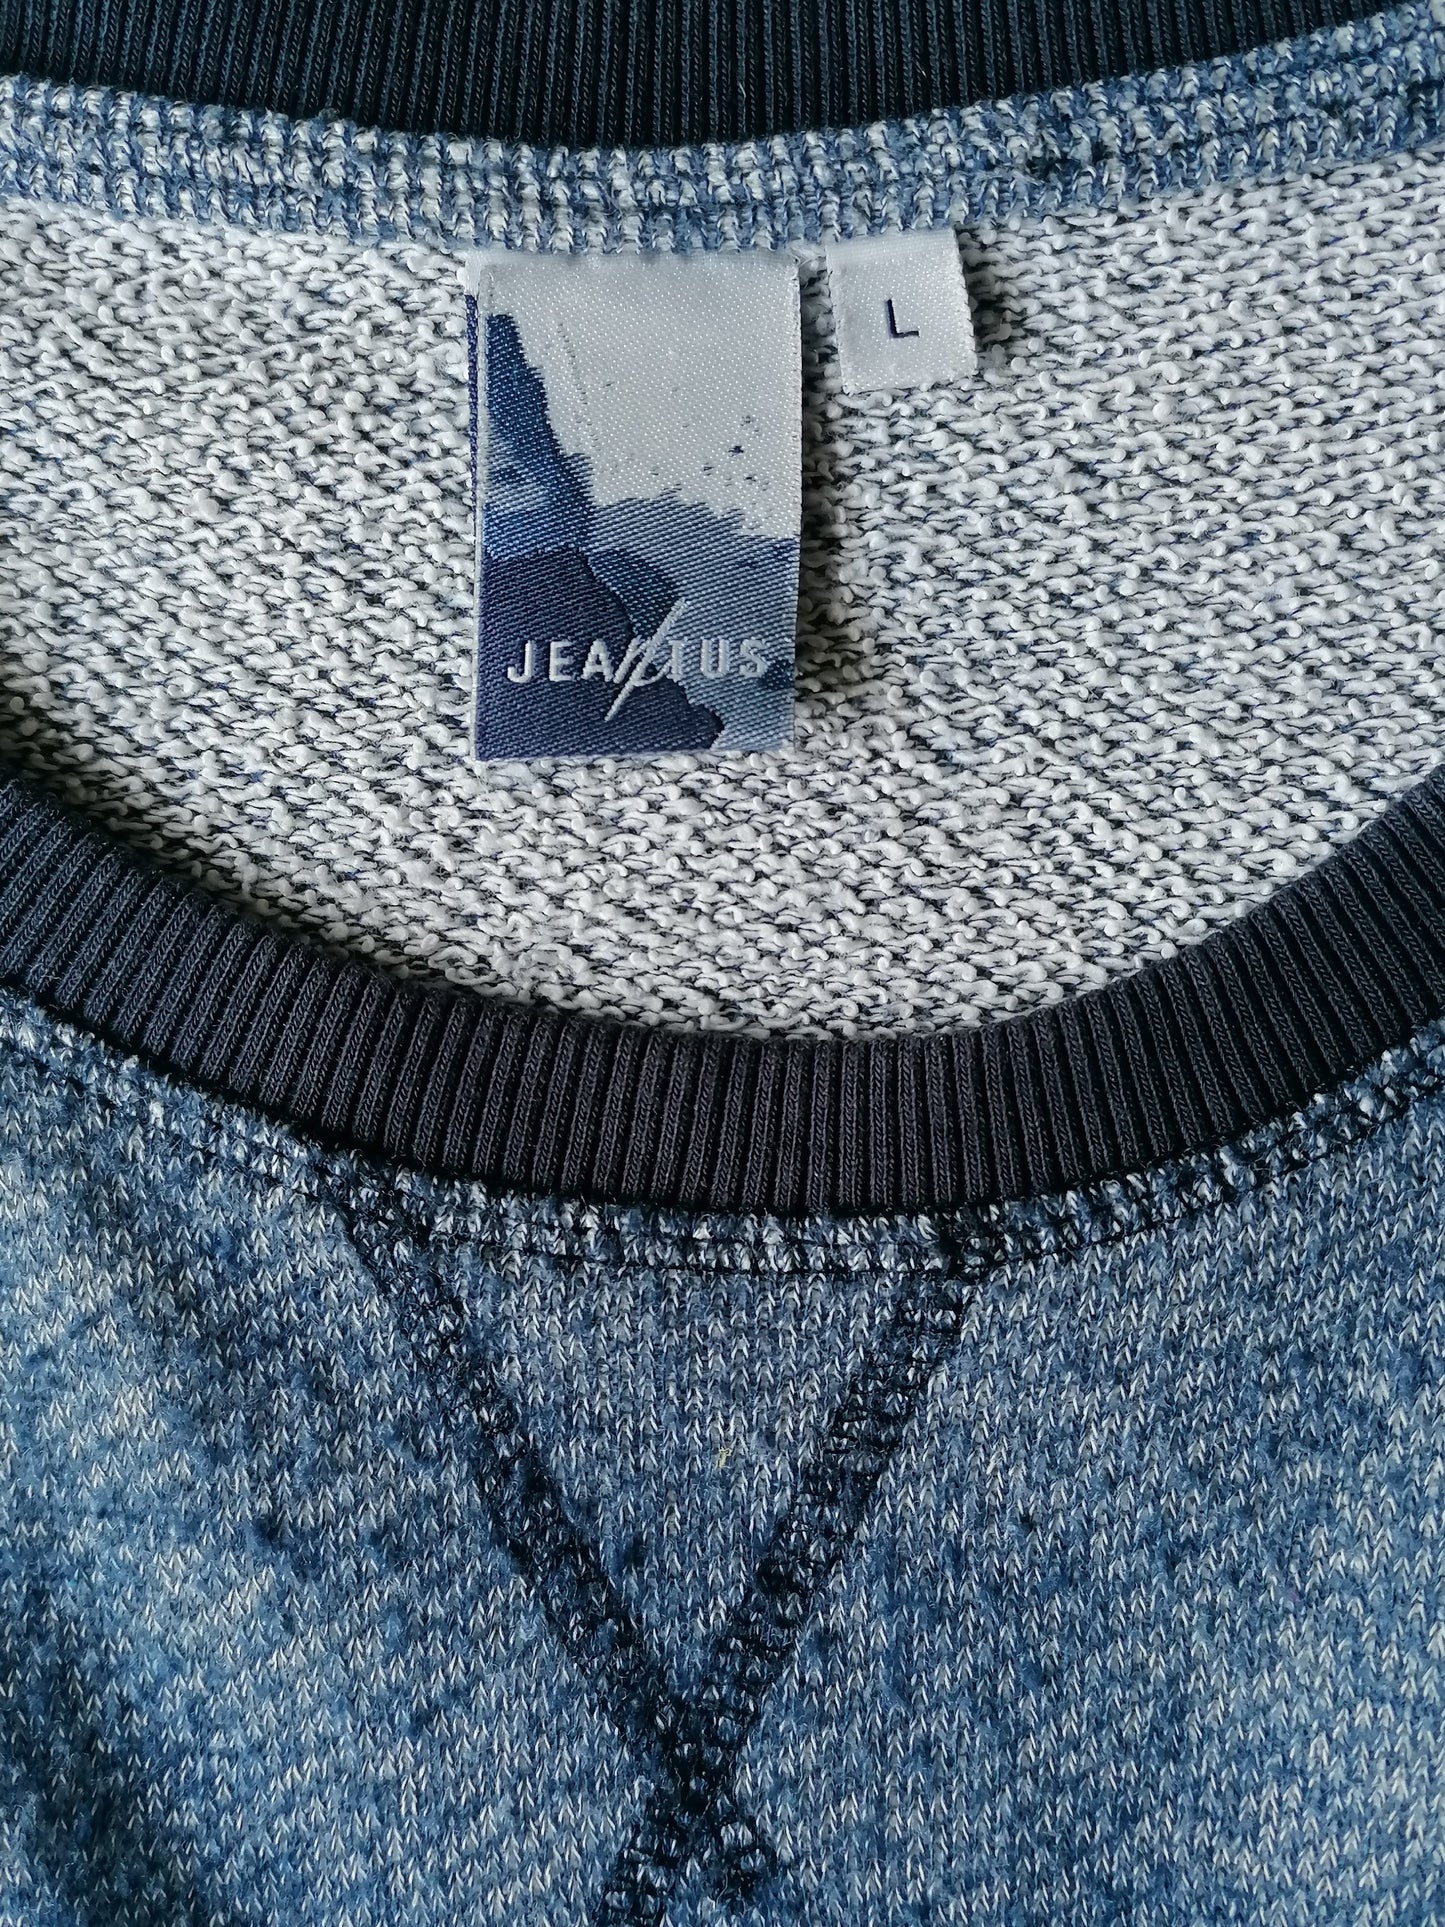 Jeanius sweater. Blue gray mixed. Size L.